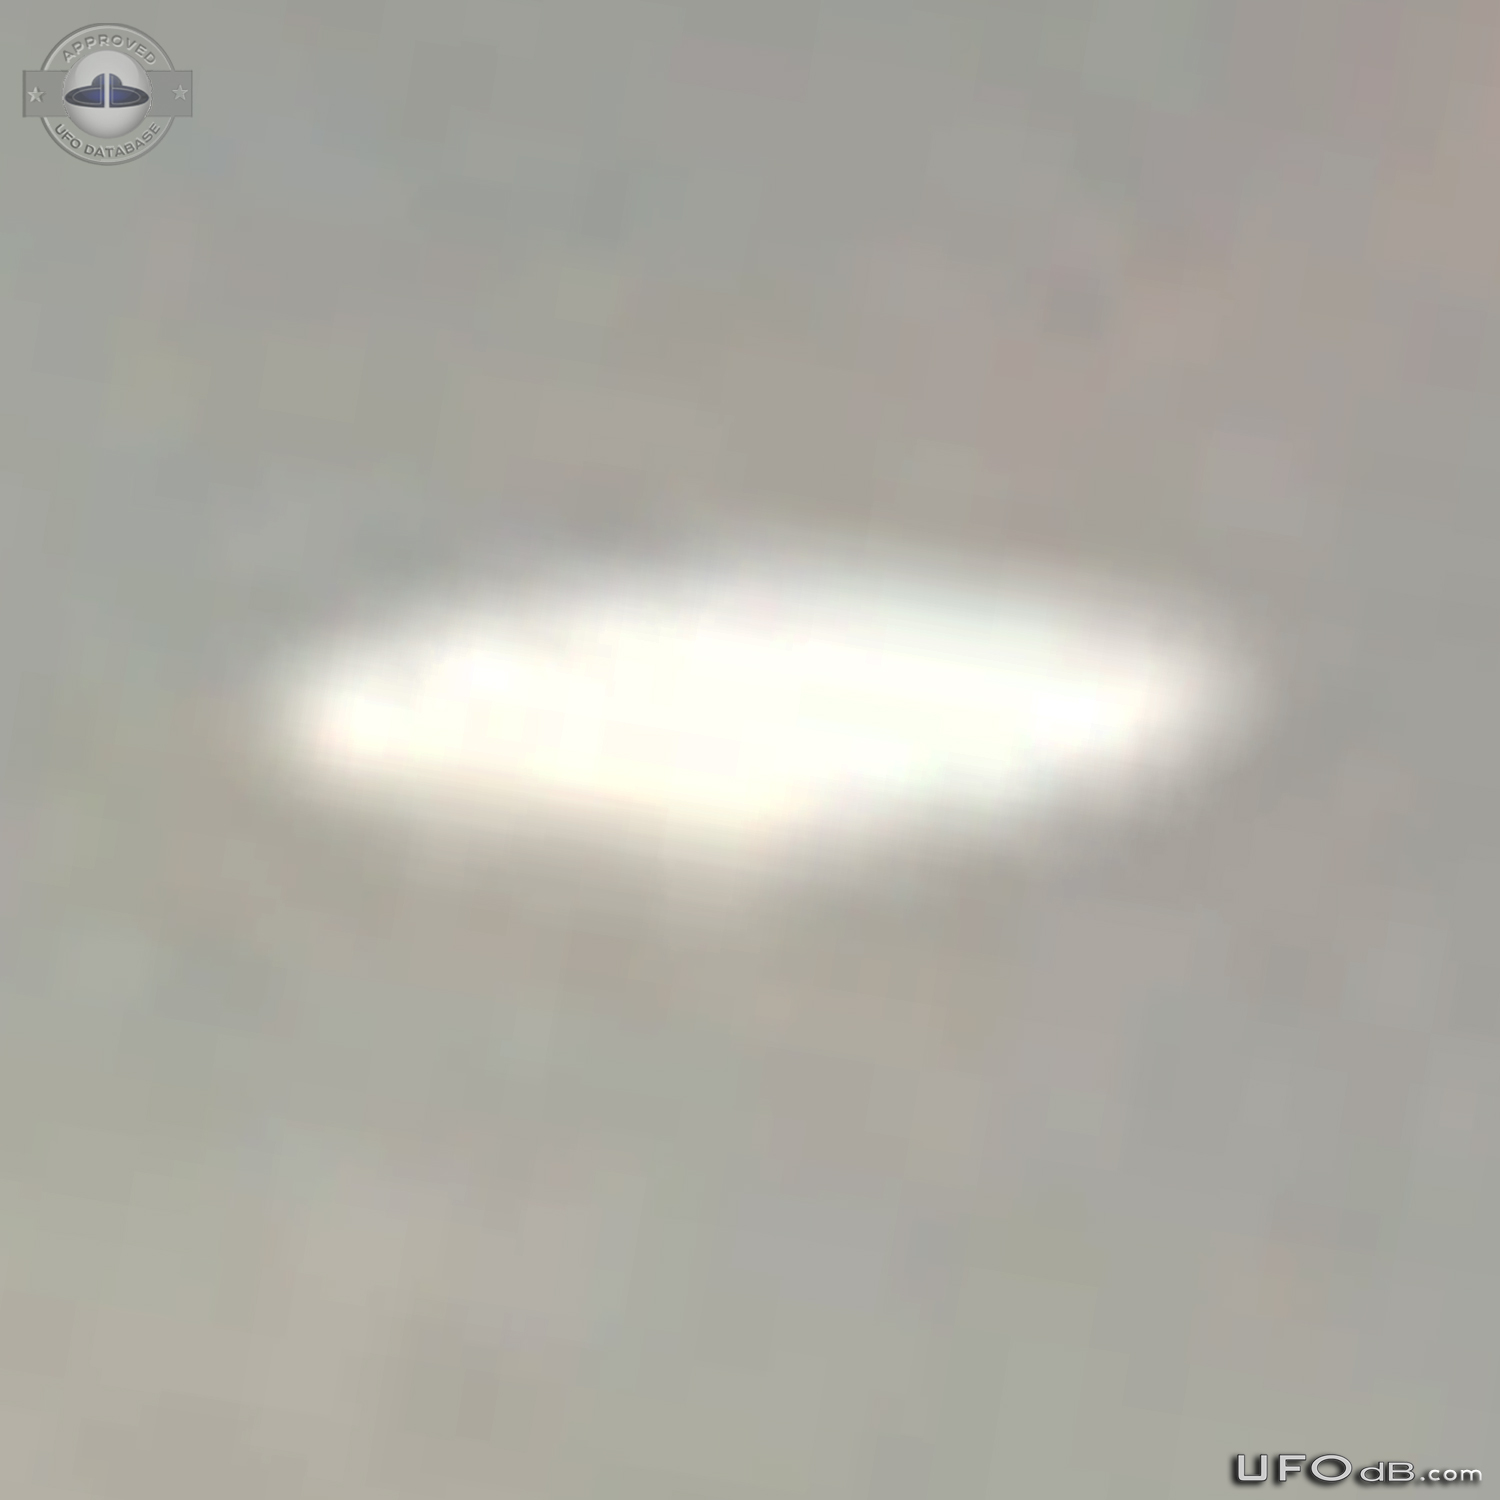 Morning UFO sighting in the sky above Barnoldswick, Lancashire UK 2013 UFO Picture #554-6